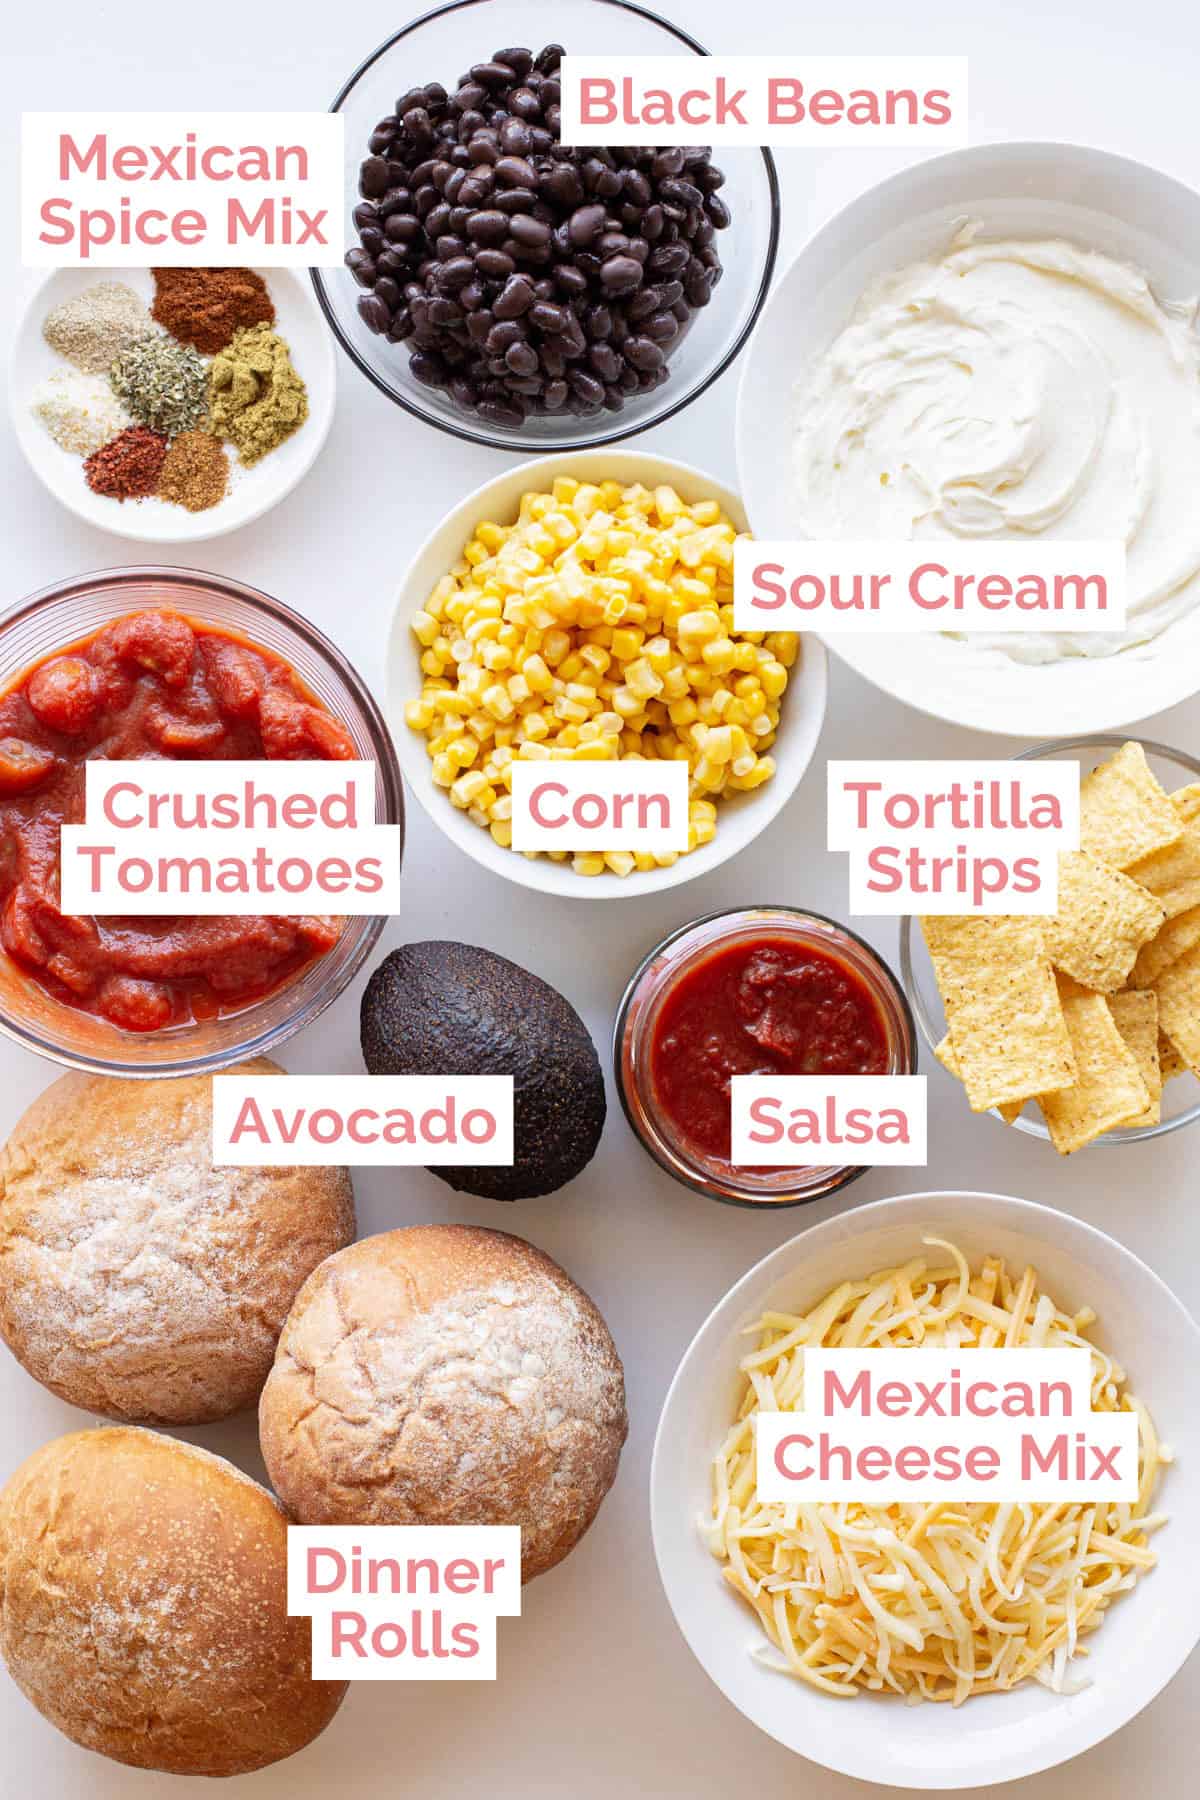 Ingredients laid out to make Mexican inspired cob loaf dips.